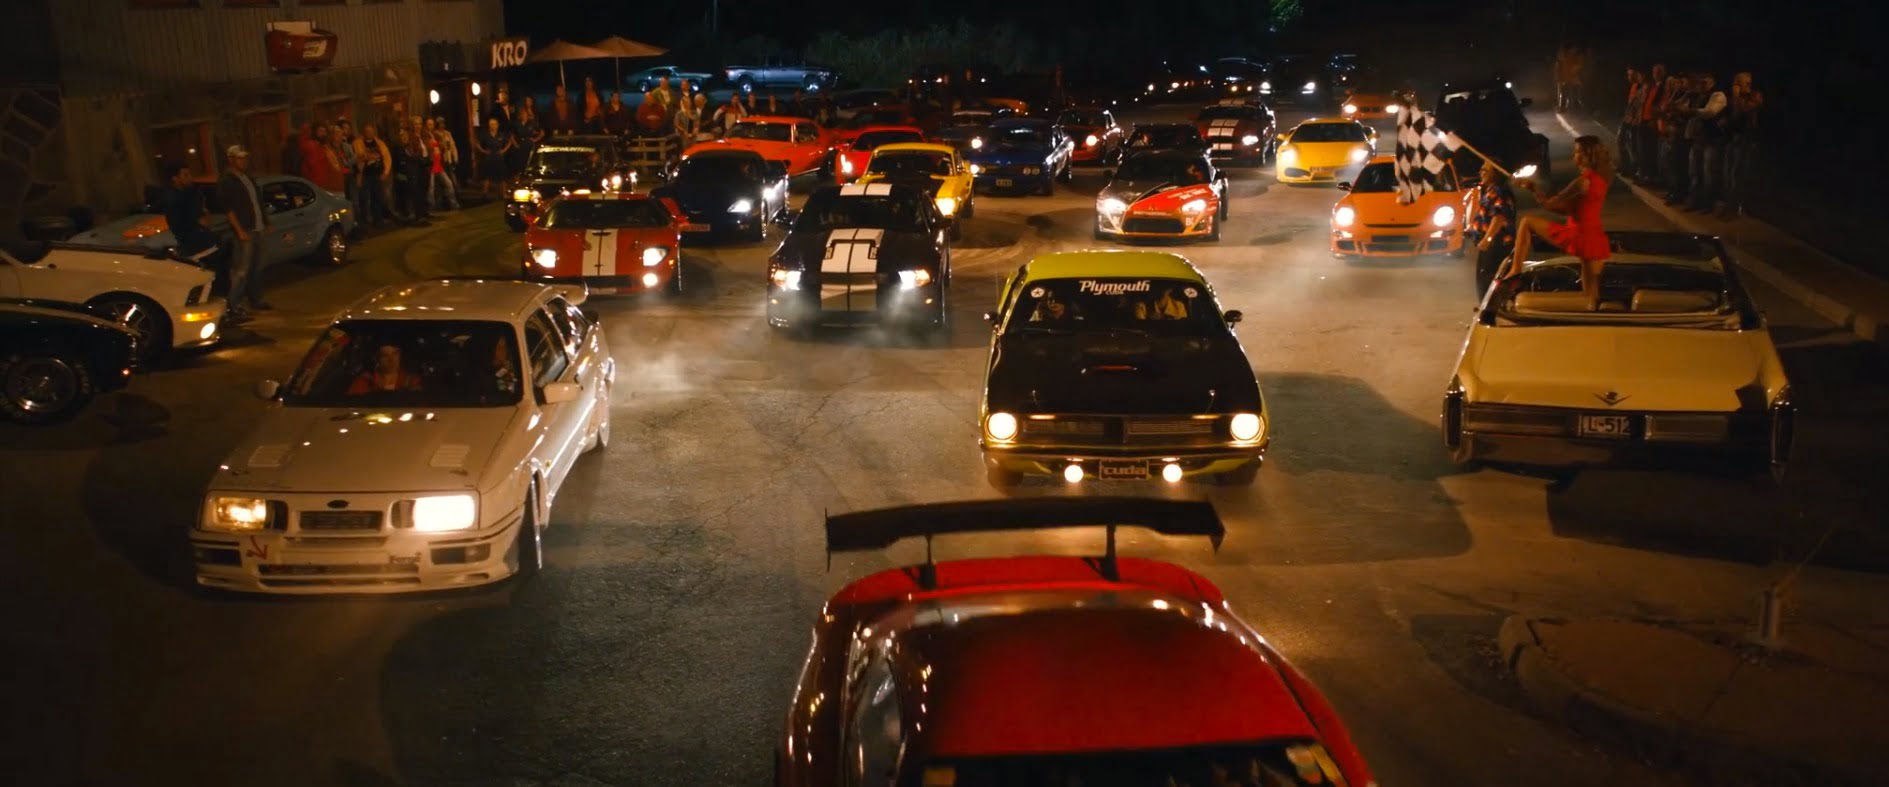 norske-fast-and-furious-borning-trailer-video